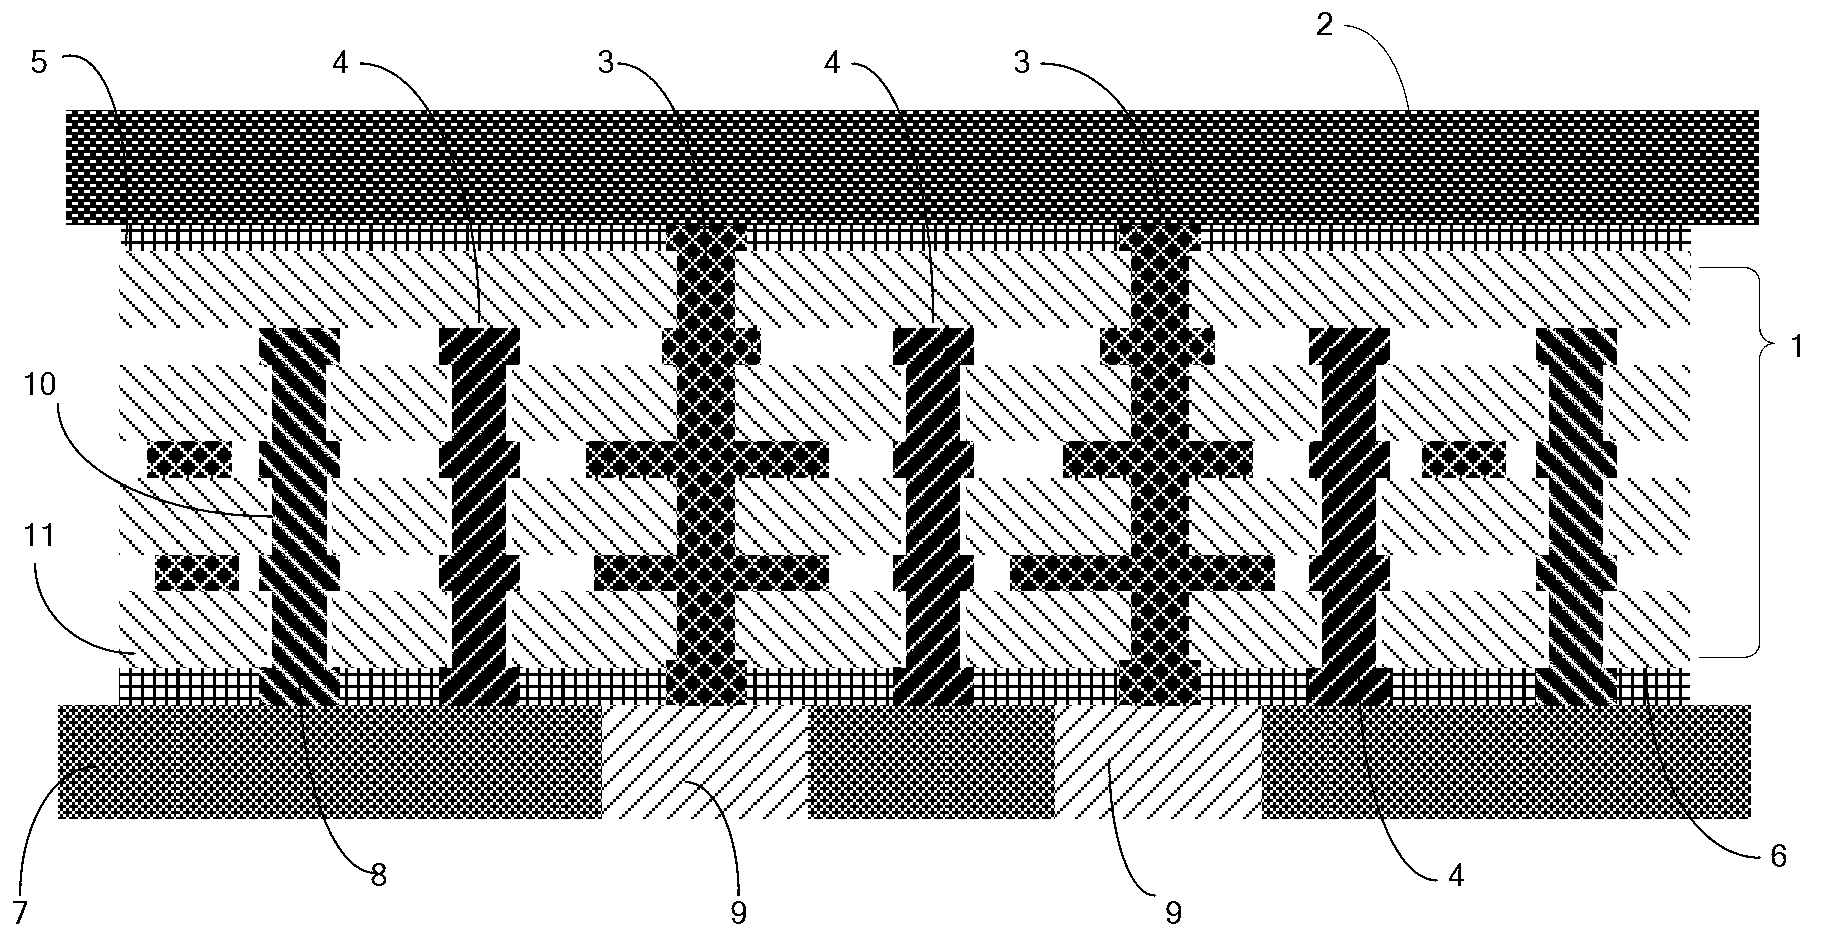 Packaging structure shared by heat dissipation channel and ground wire channel in three-dimensional packaging